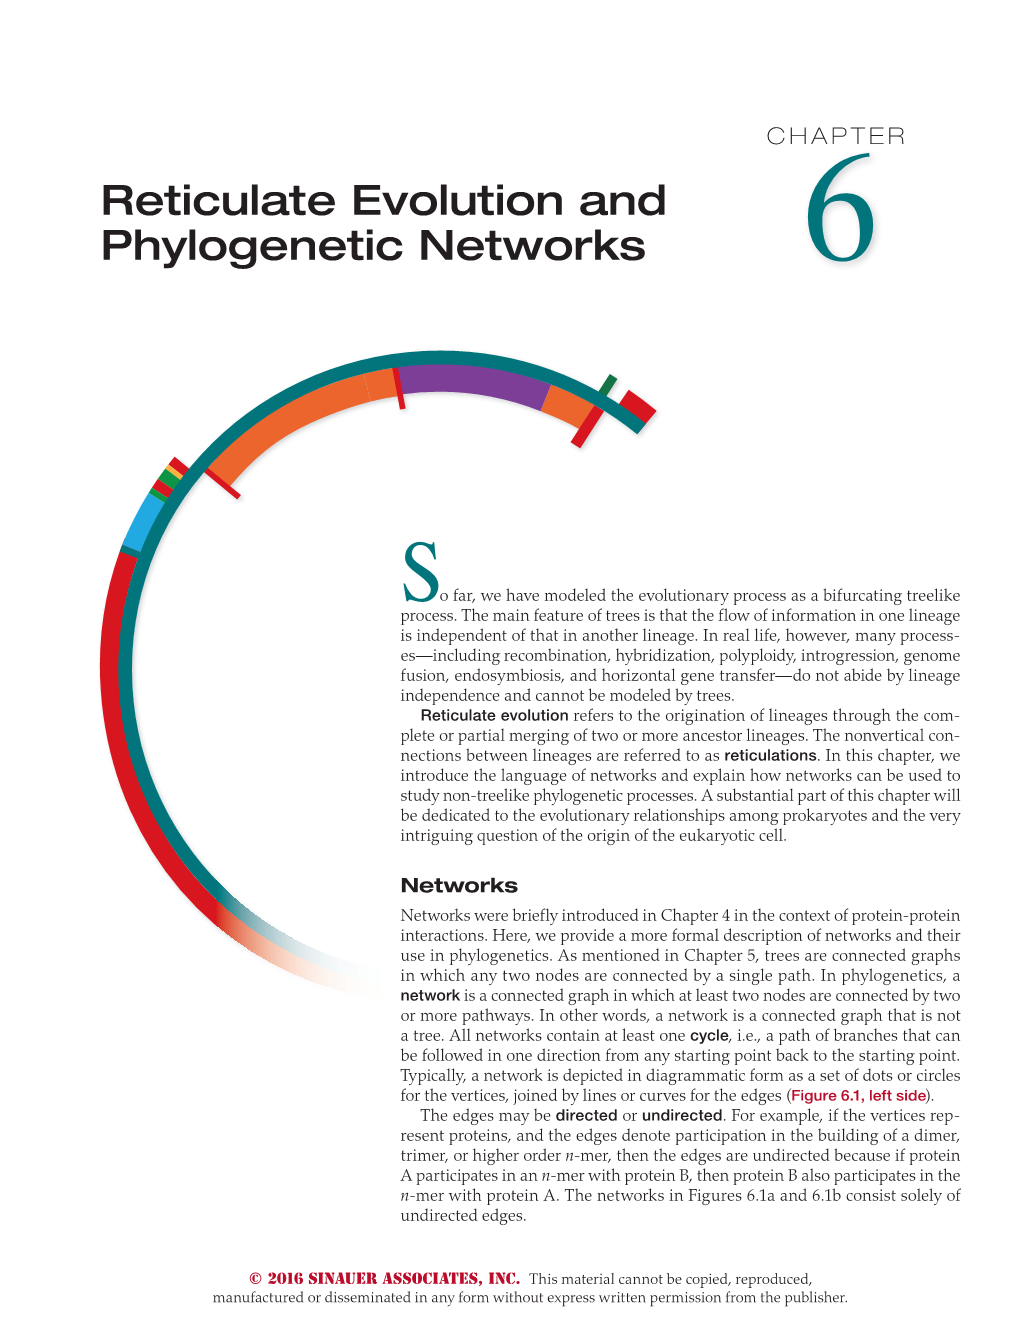 Reticulate Evolution and Phylogenetic Networks 6